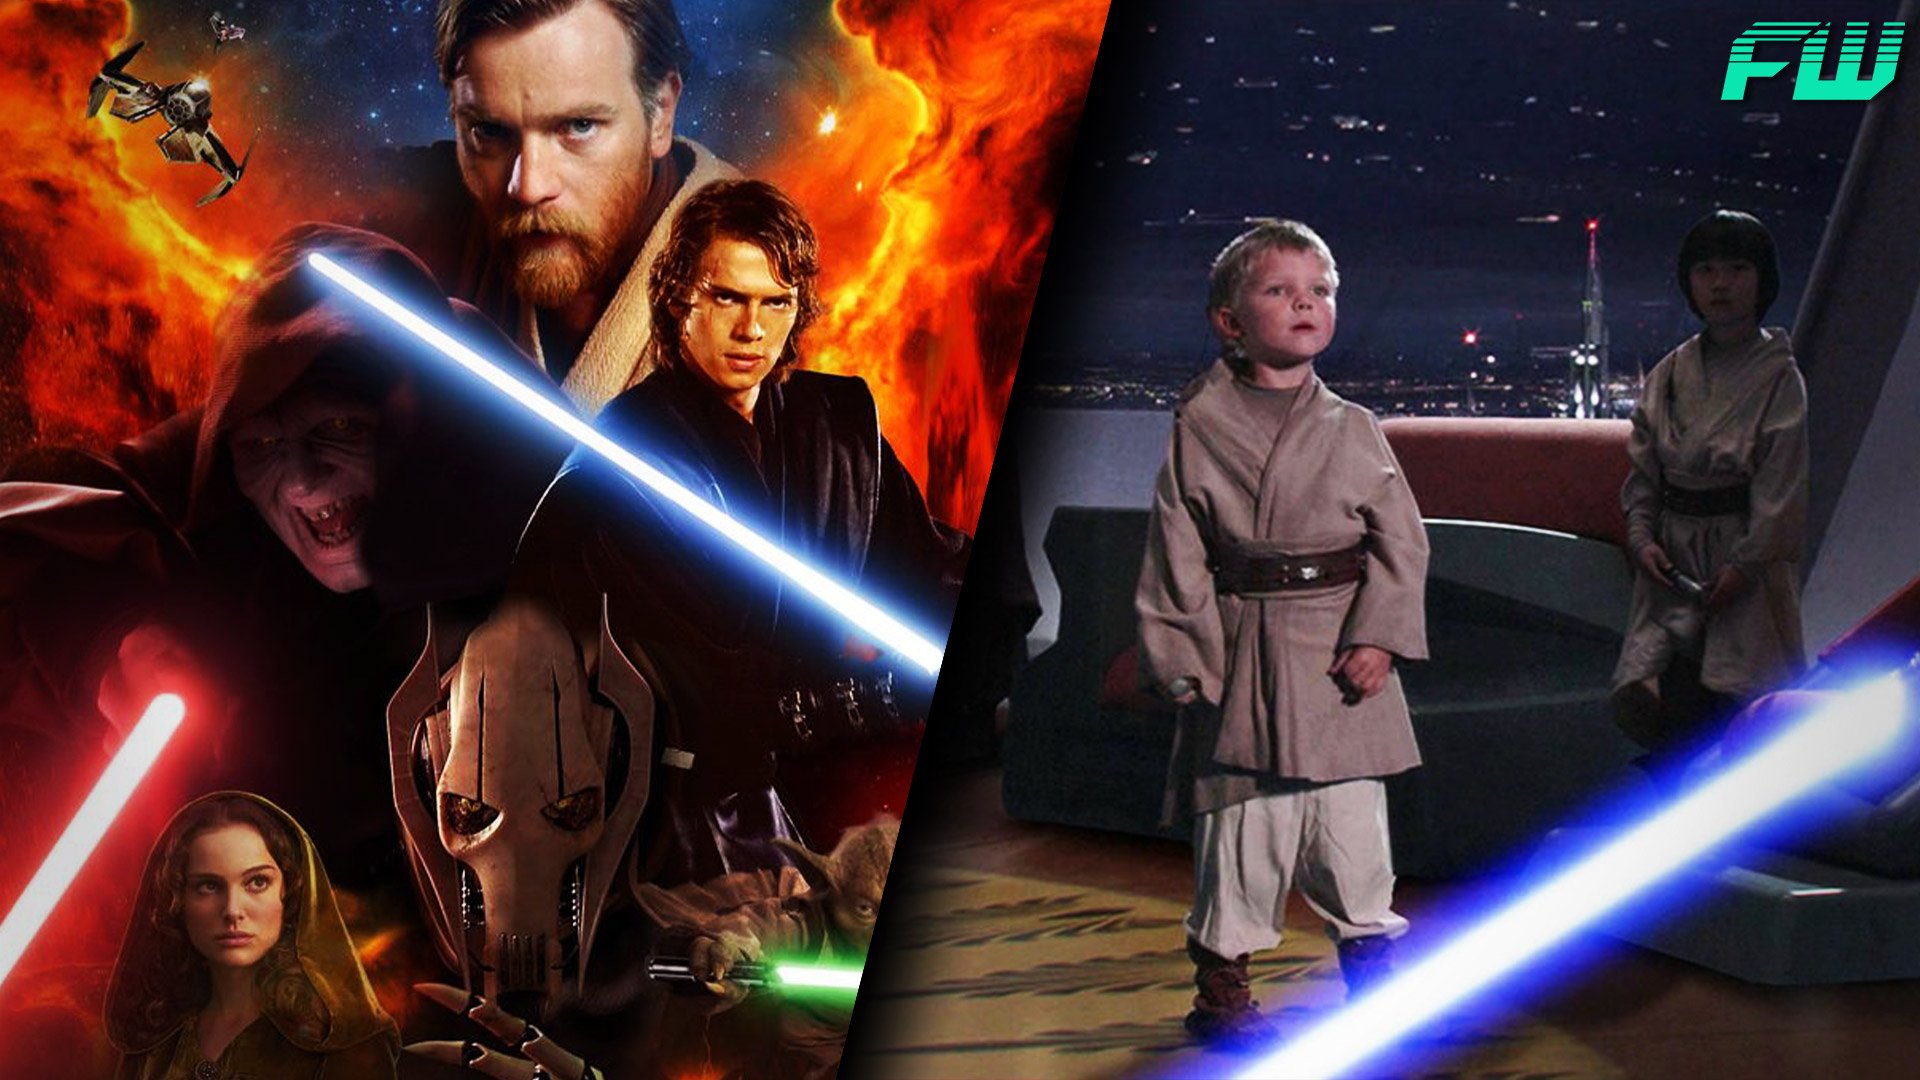 12 Details You Might Have Missed in 'Star Wars: Revenge of the Sith